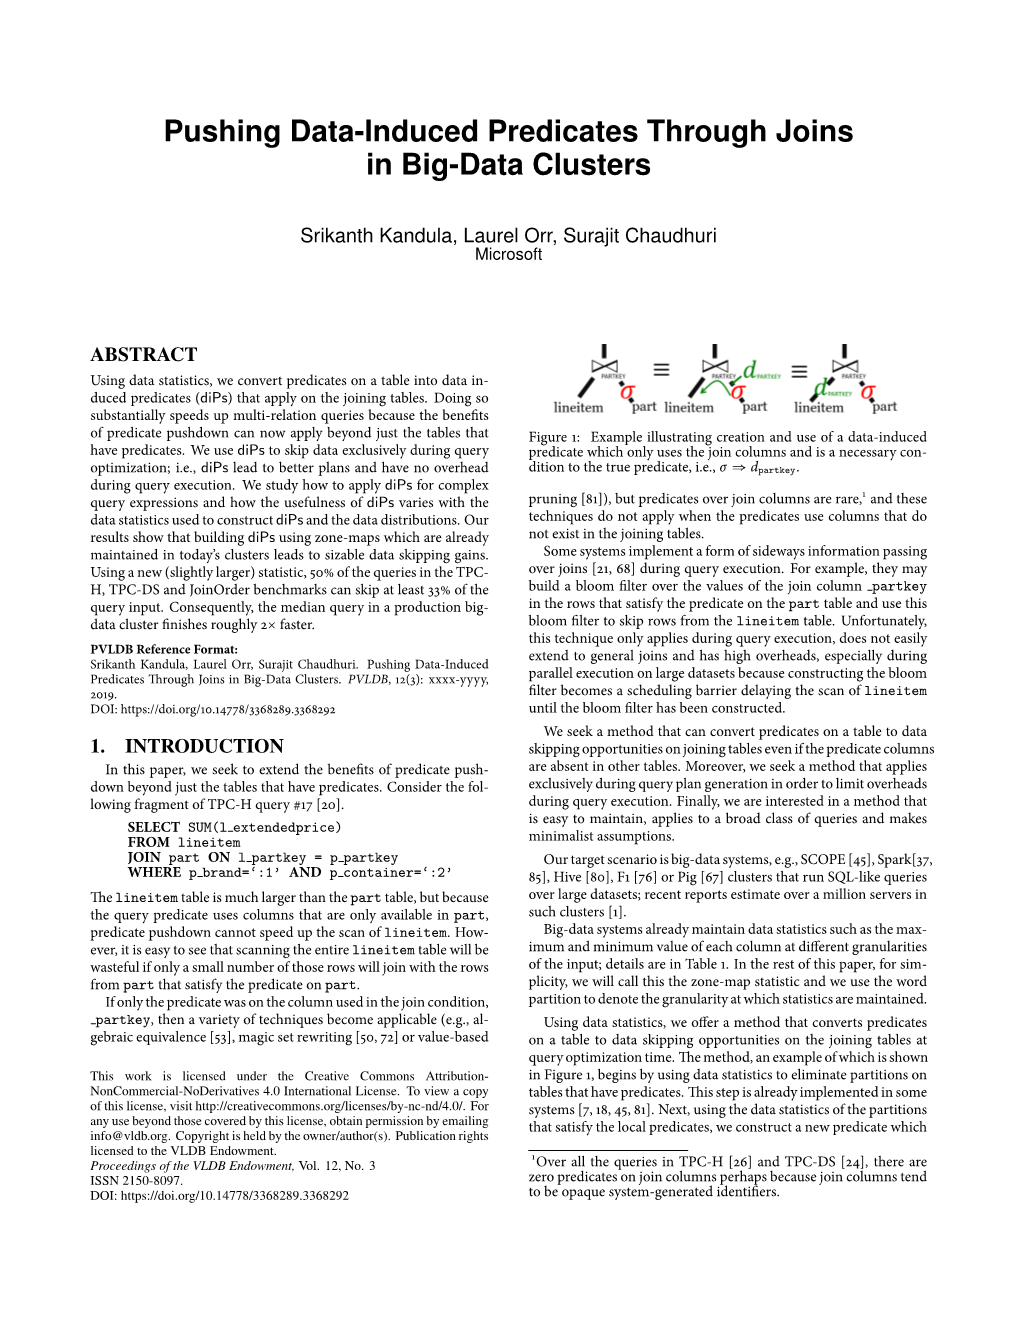 Pushing Data-Induced Predicates Through Joins in Big-Data Clusters